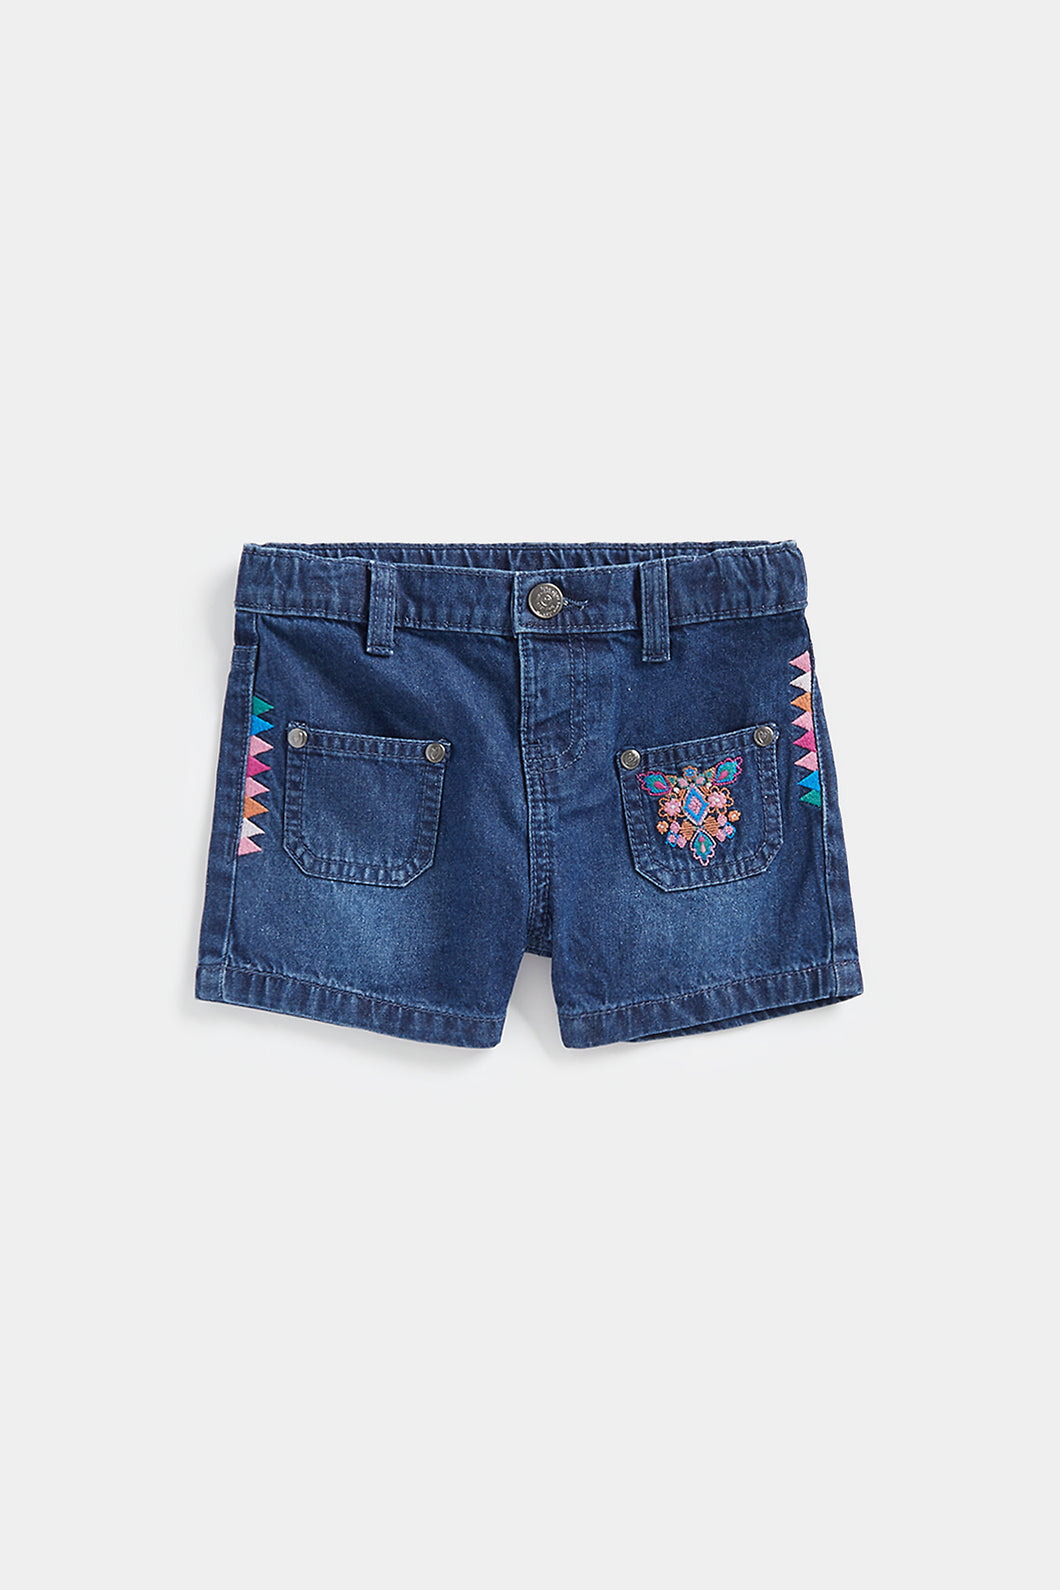 Mothercare Embroidered Denim Shorts